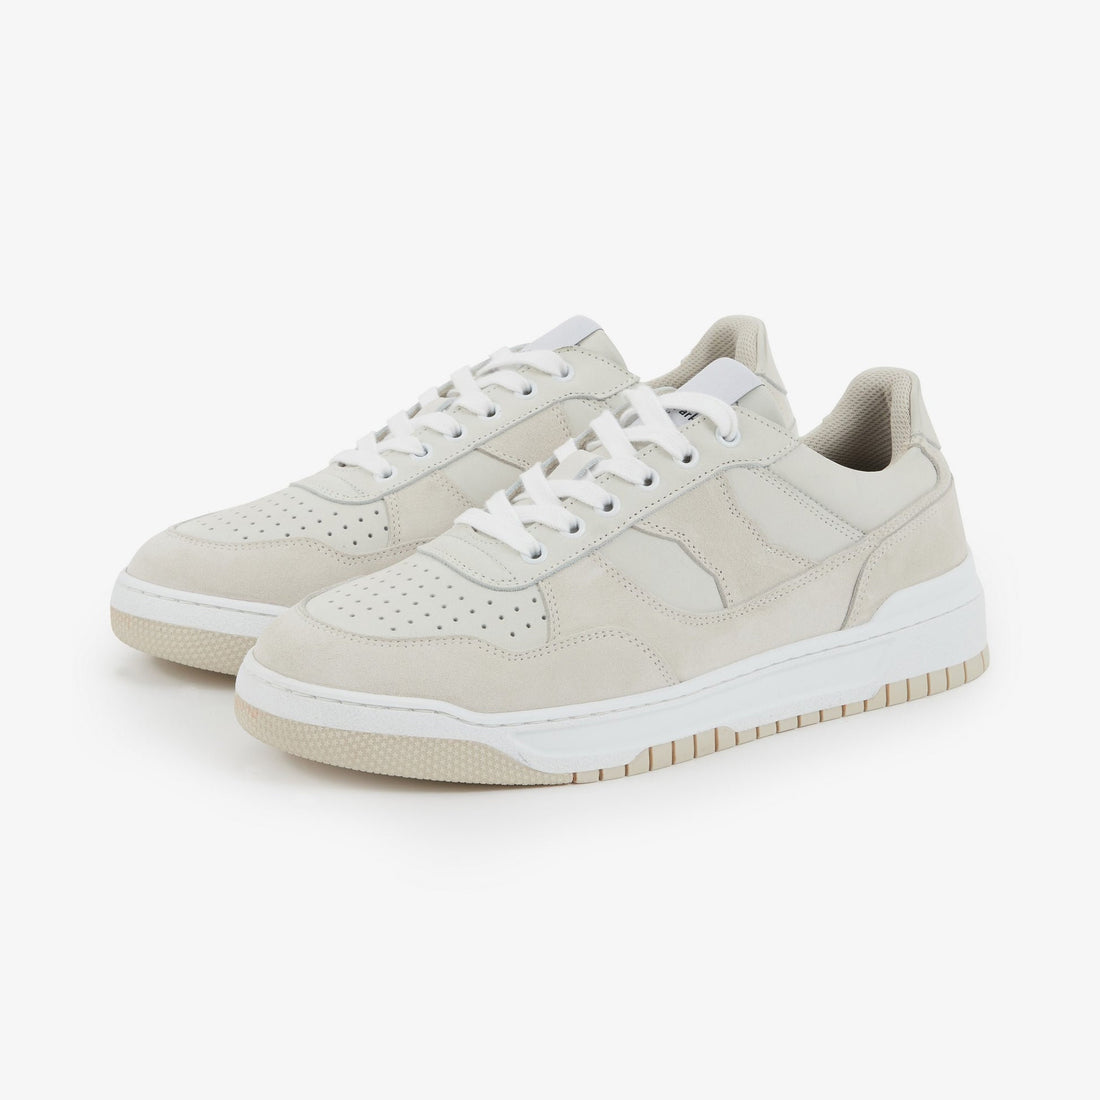 Off-White Two-Tone Leather Trainers_H23CHSTE0004_ECC2_02